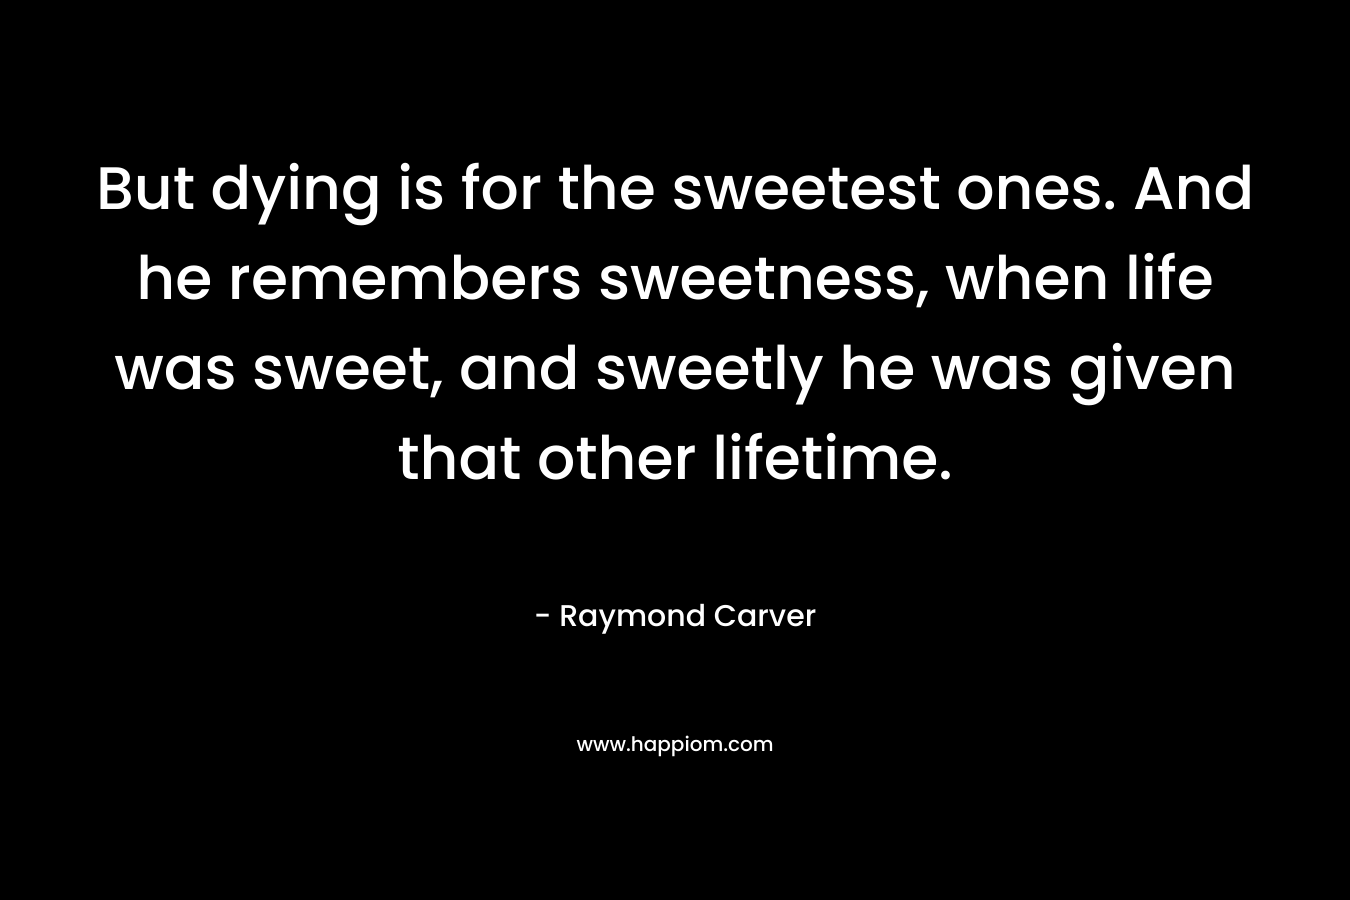 But dying is for the sweetest ones. And he remembers sweetness, when life was sweet, and sweetly he was given that other lifetime. – Raymond Carver